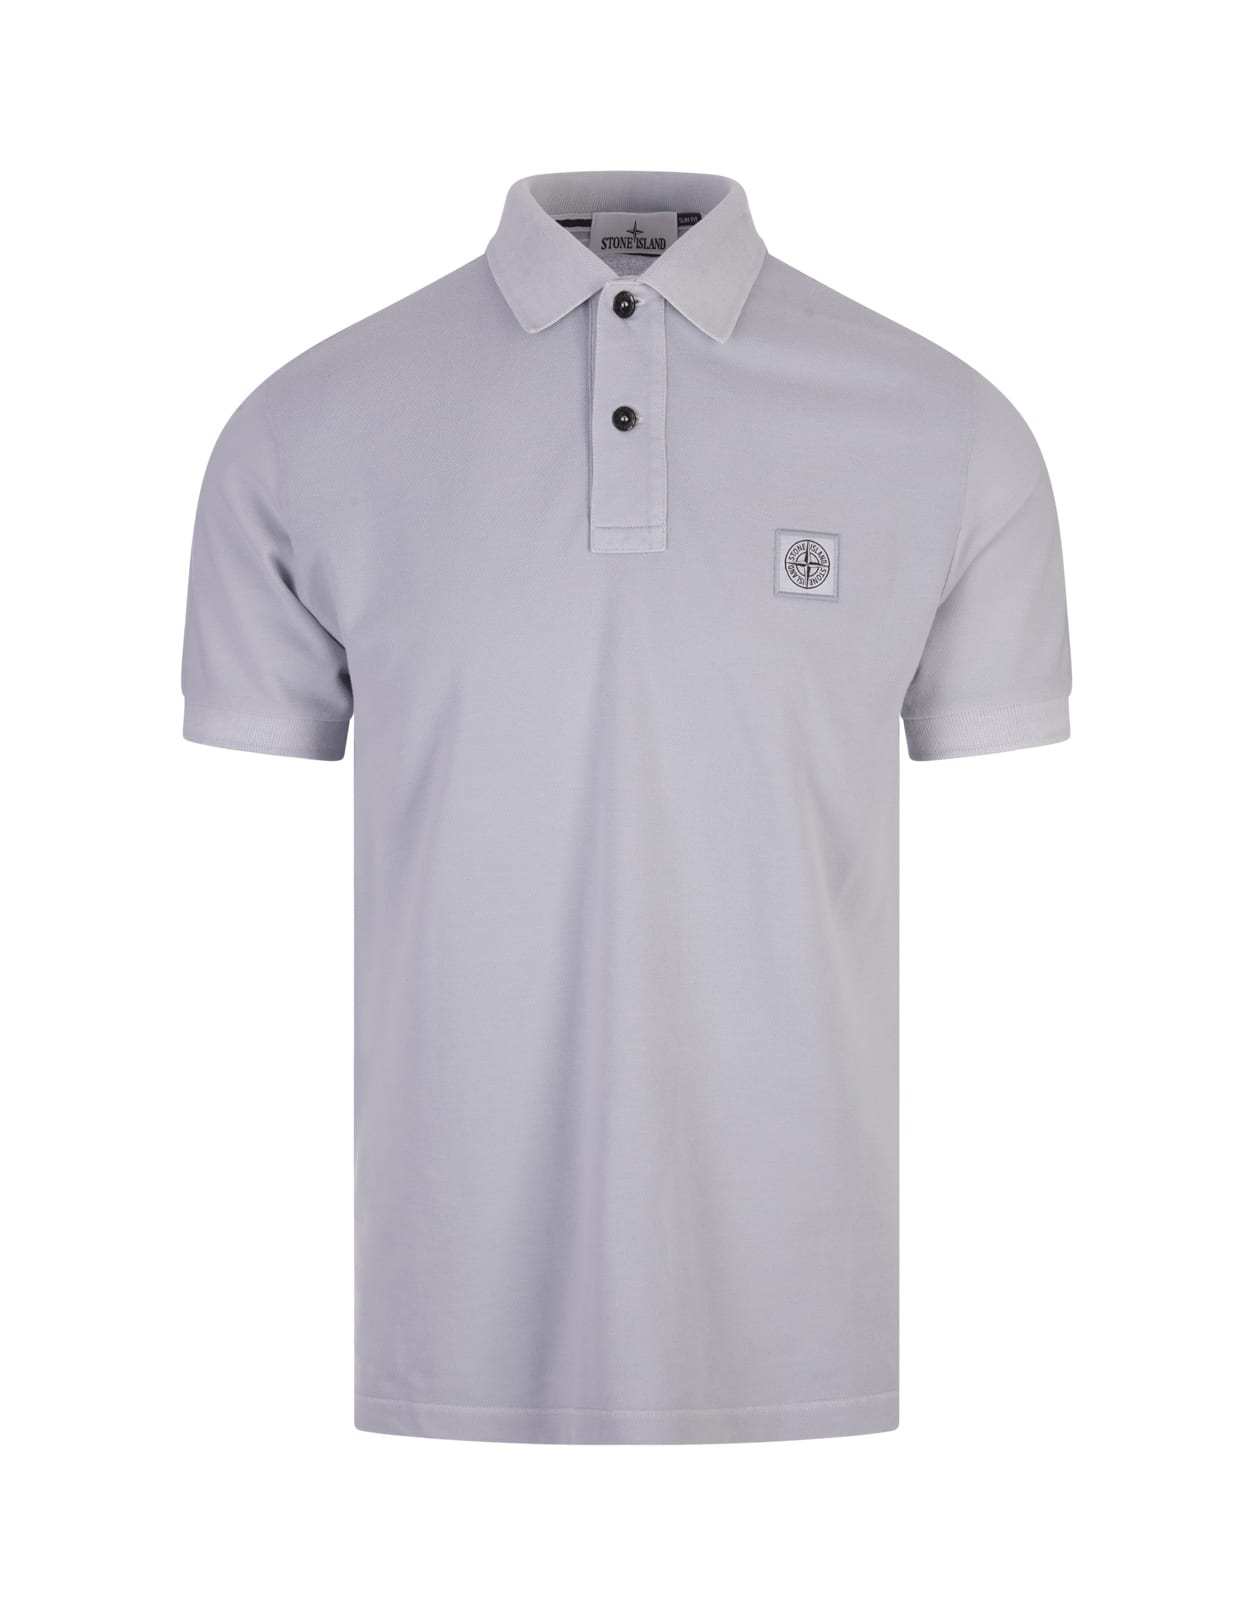 Stone Island Light Blue Pigment Dyed Slim Fit Polo Shirt